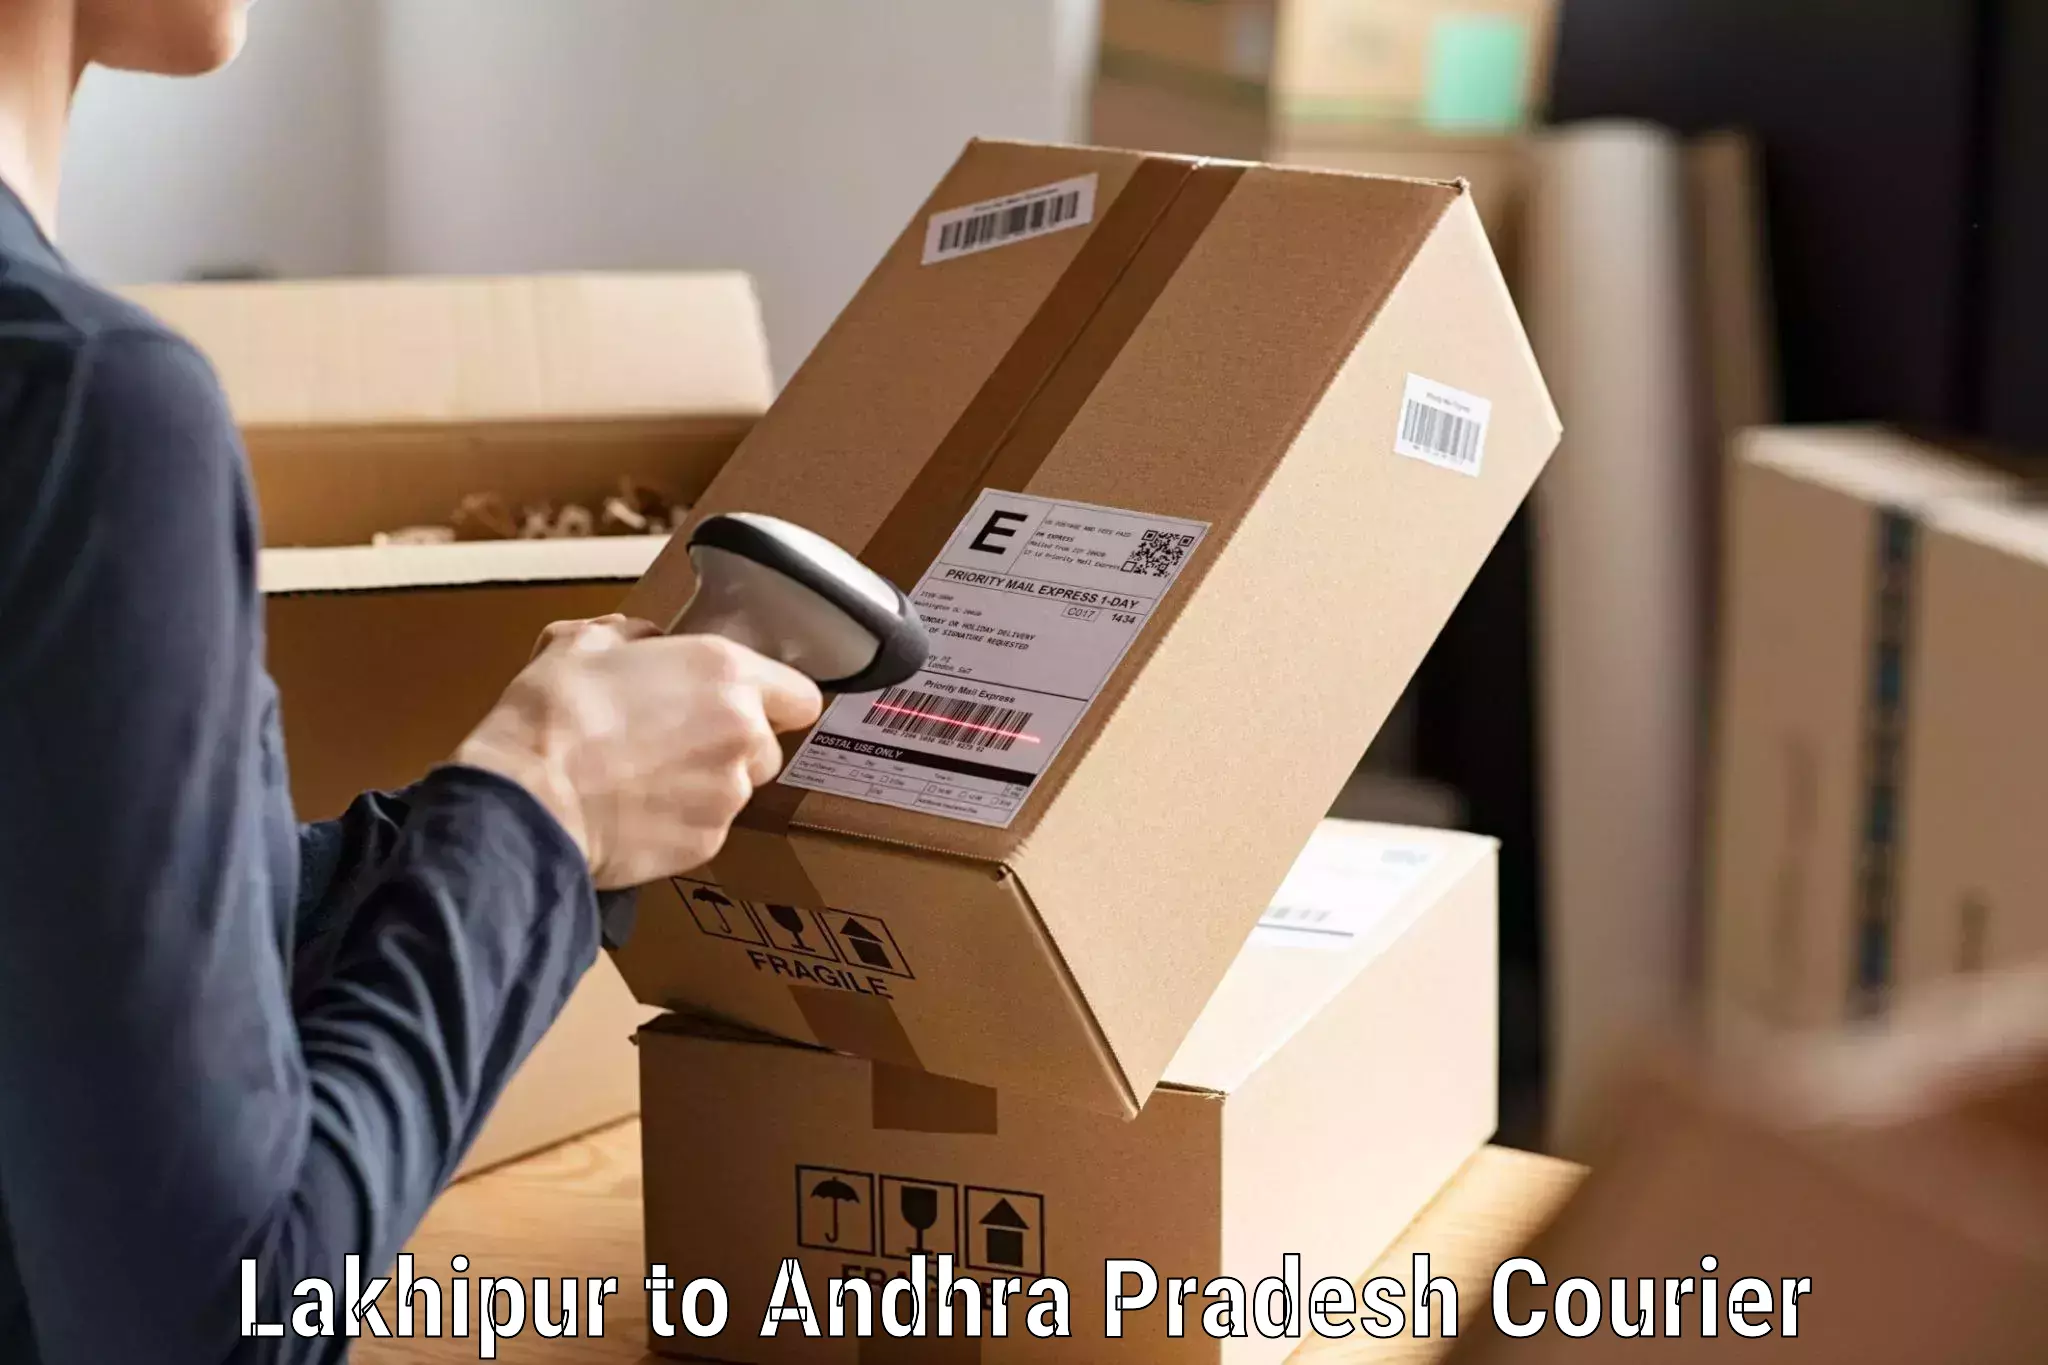 Courier service efficiency in Lakhipur to Andhra Pradesh